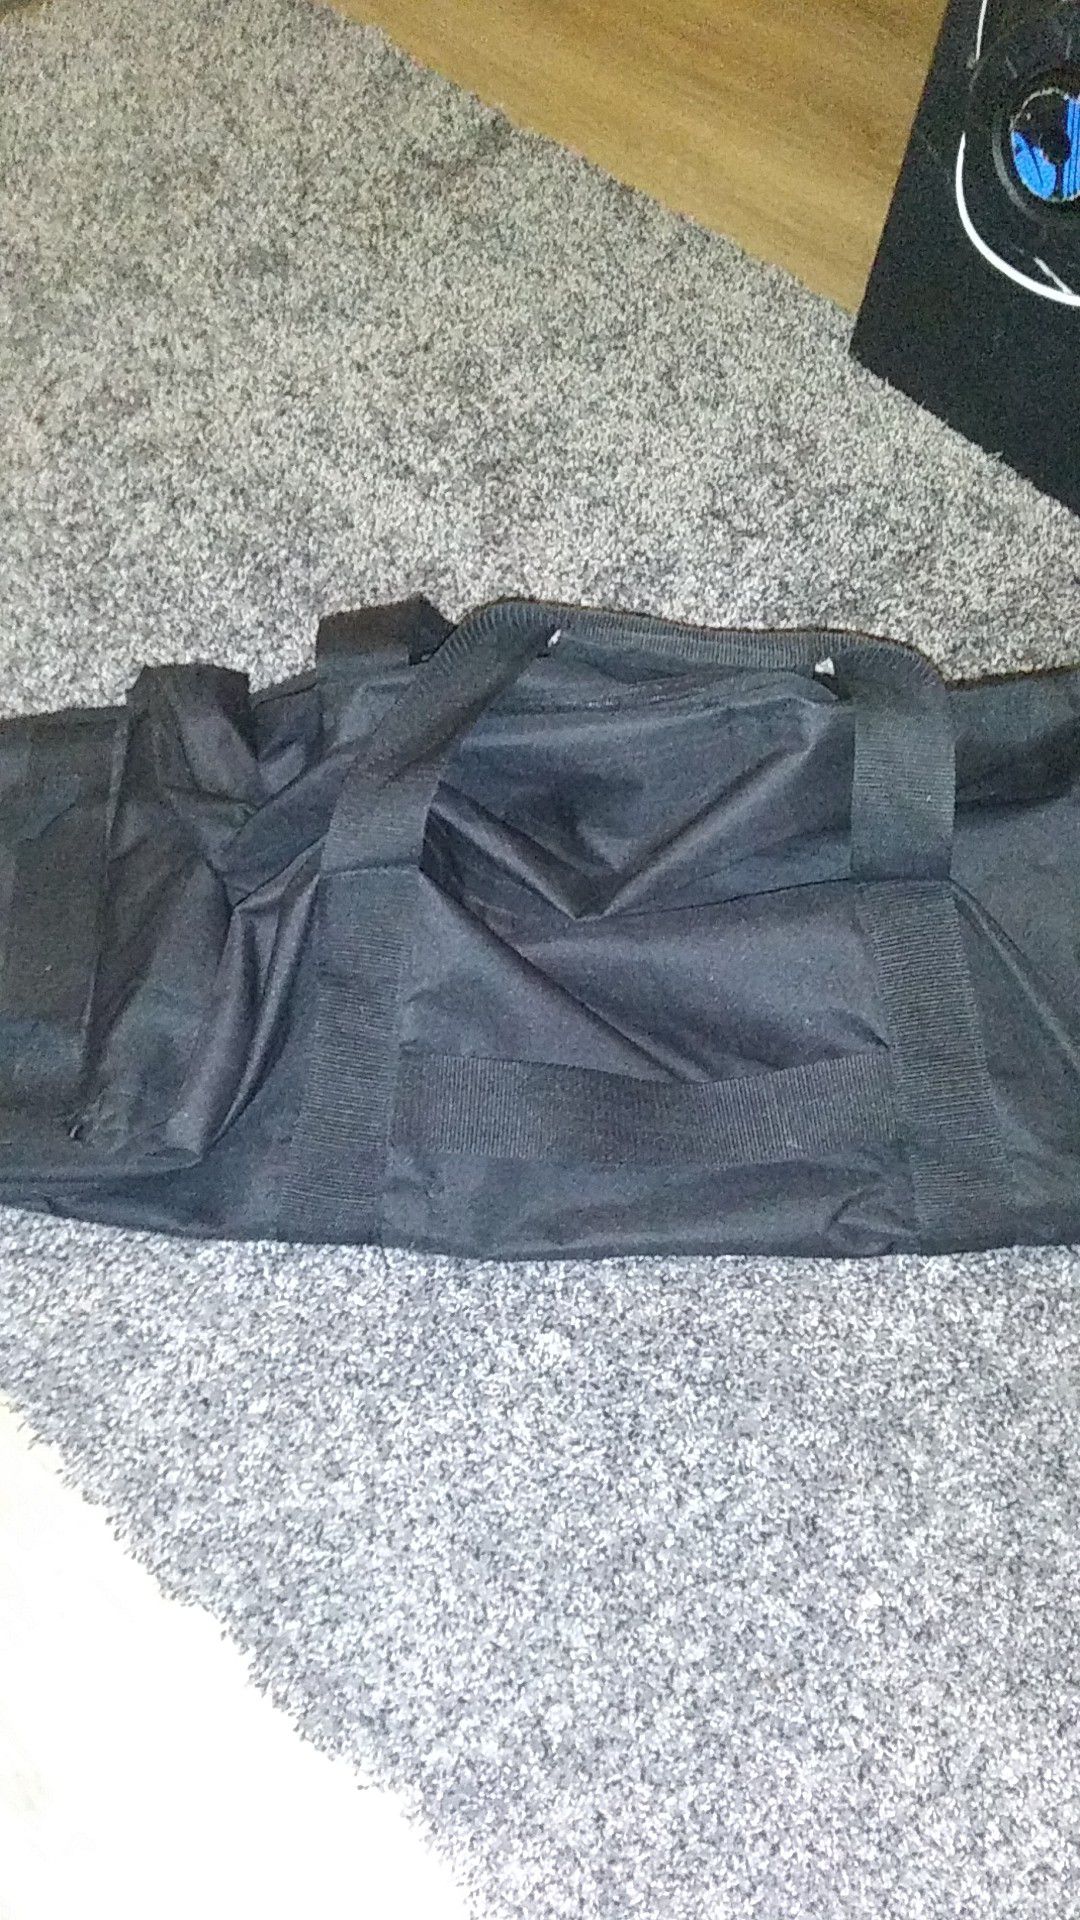 Large Duffle bag with wheels